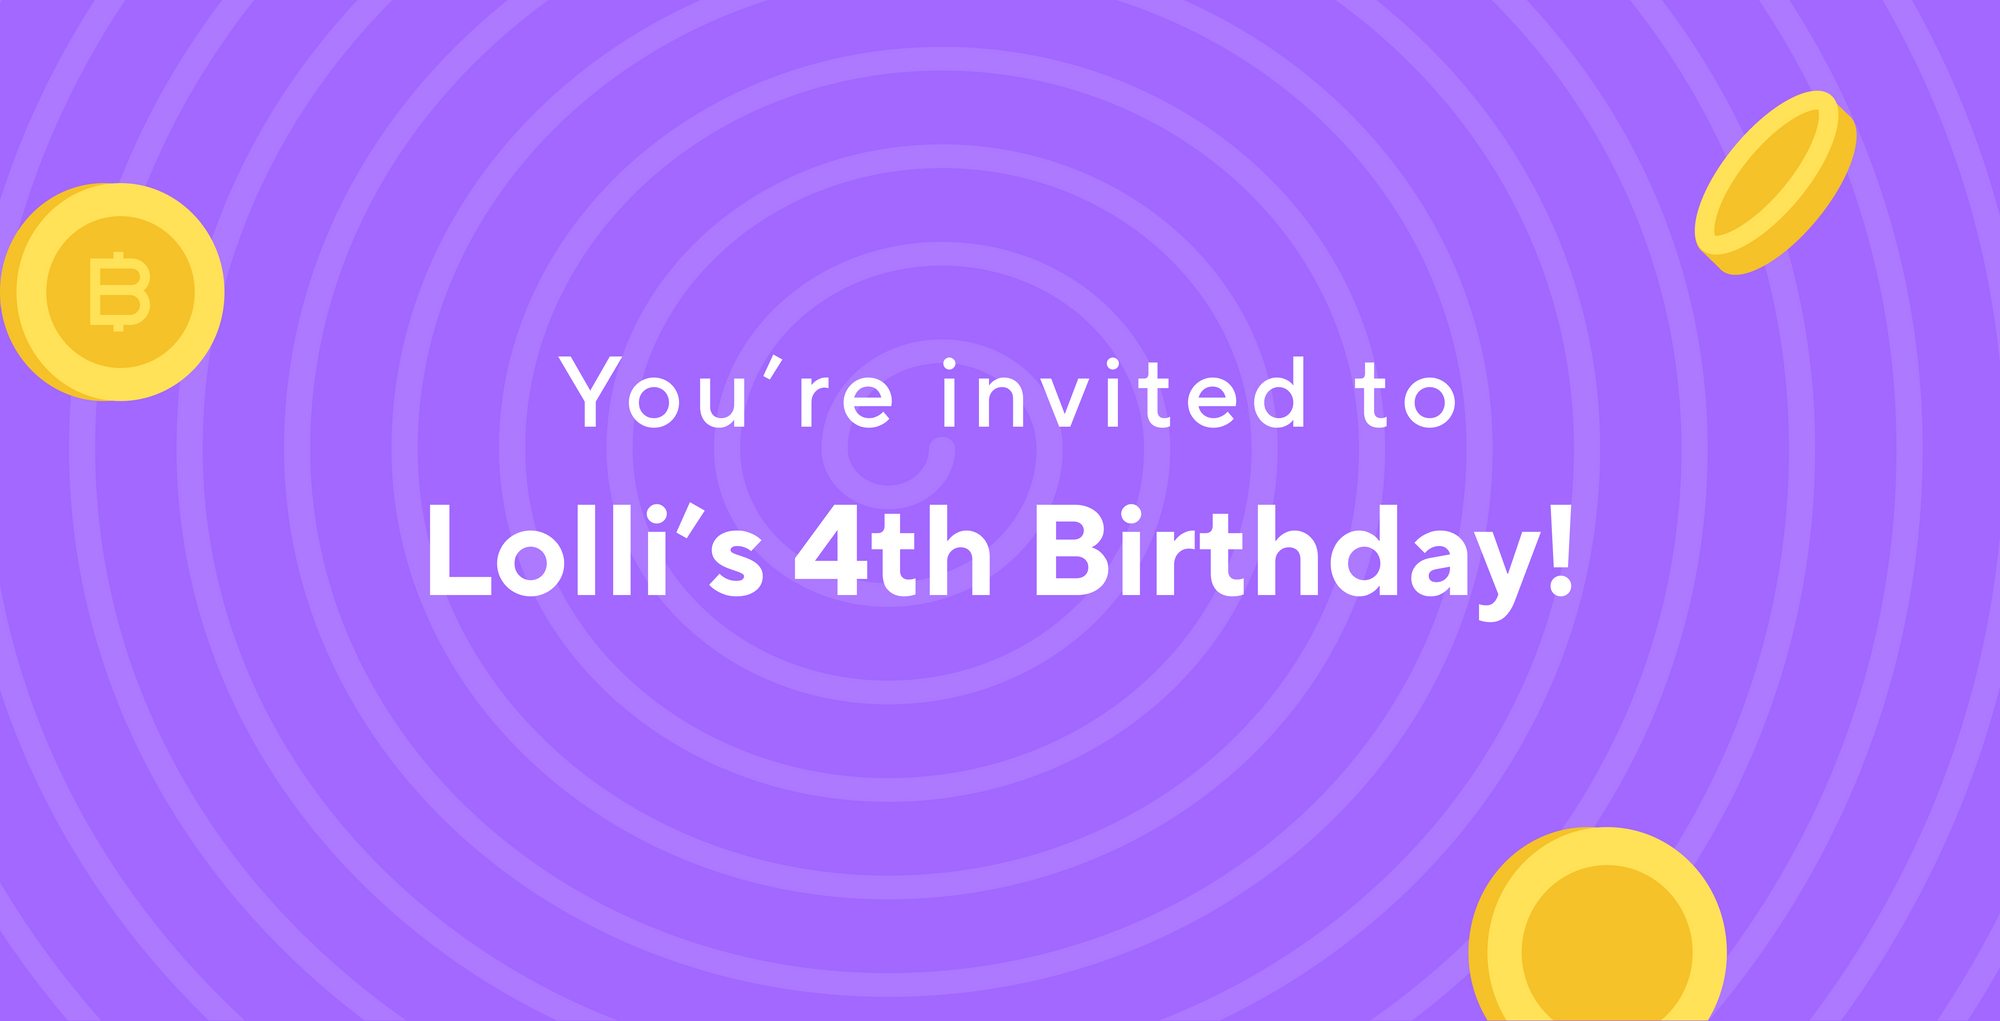 You're Invited to Celebrate Lolli's 4th Birthday!